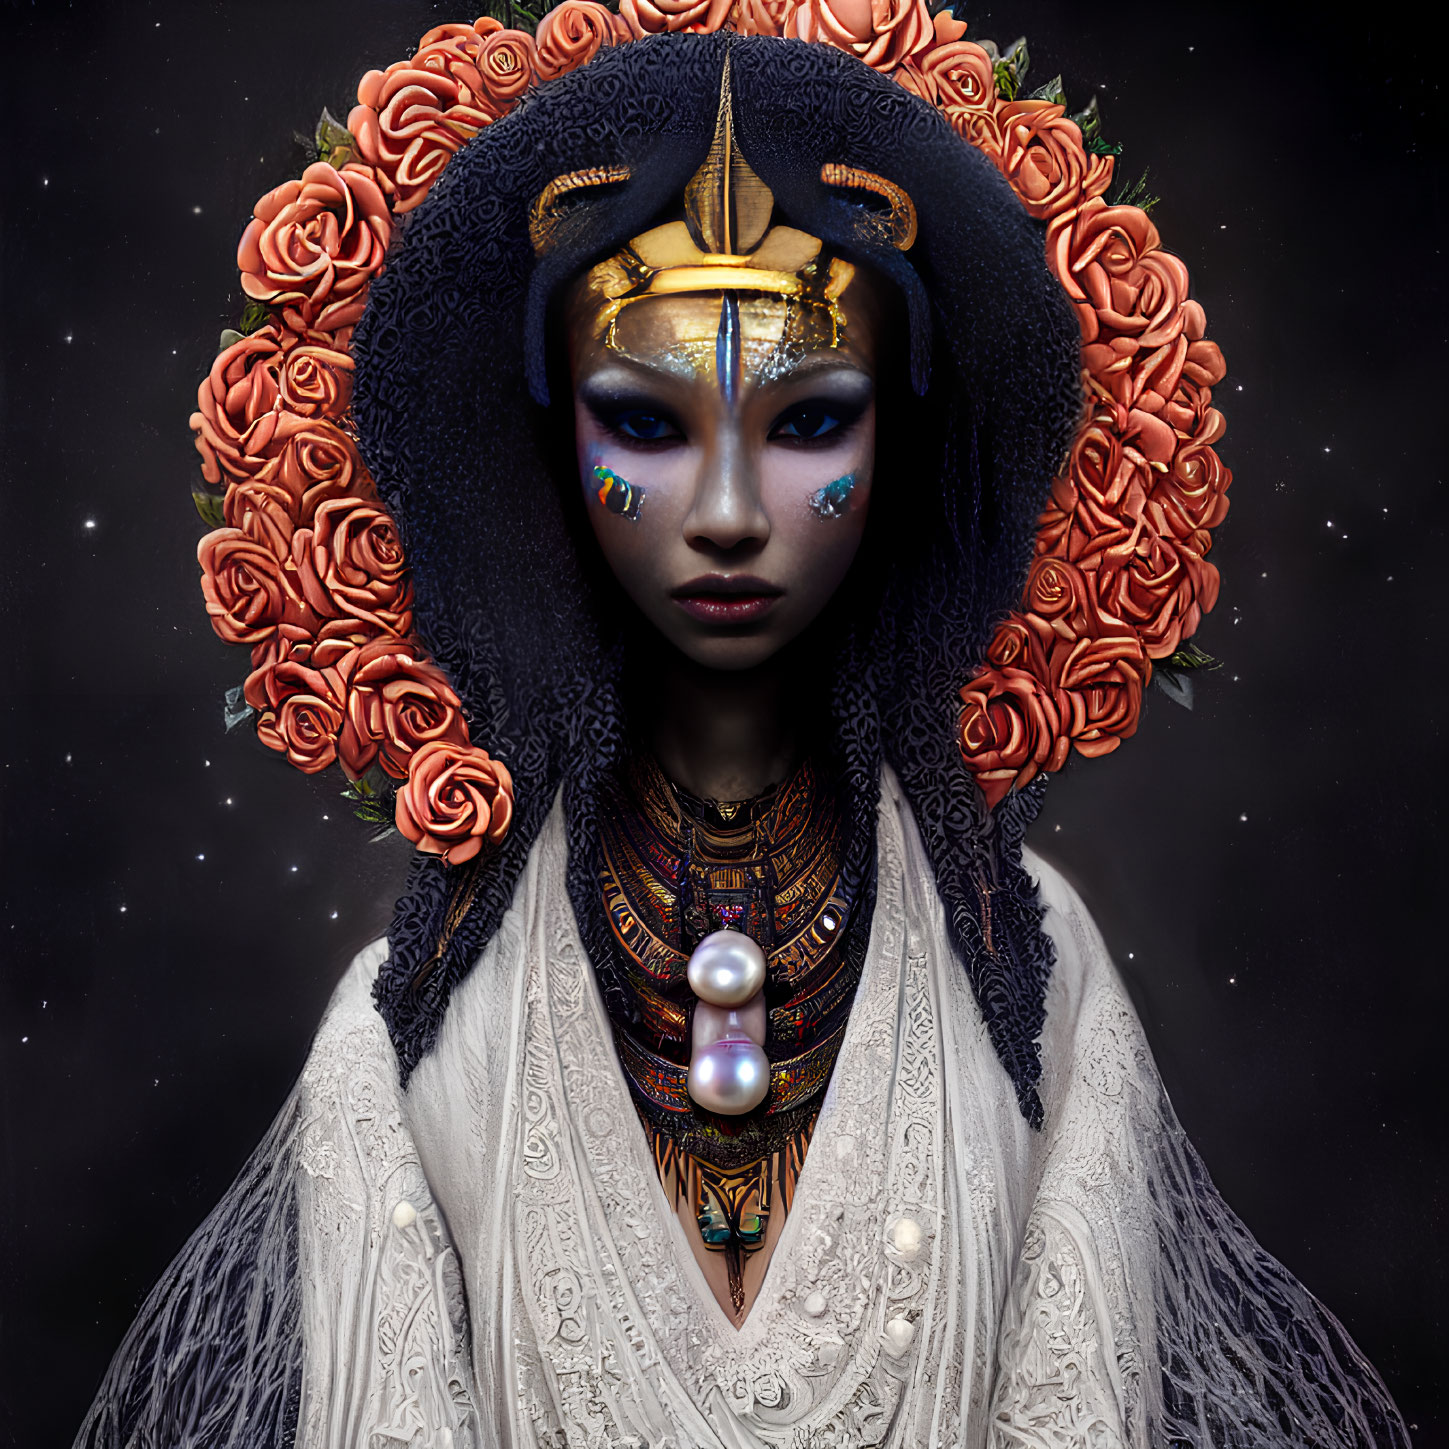 Digital artwork featuring woman with elaborate headdress and jewelry against starry backdrop